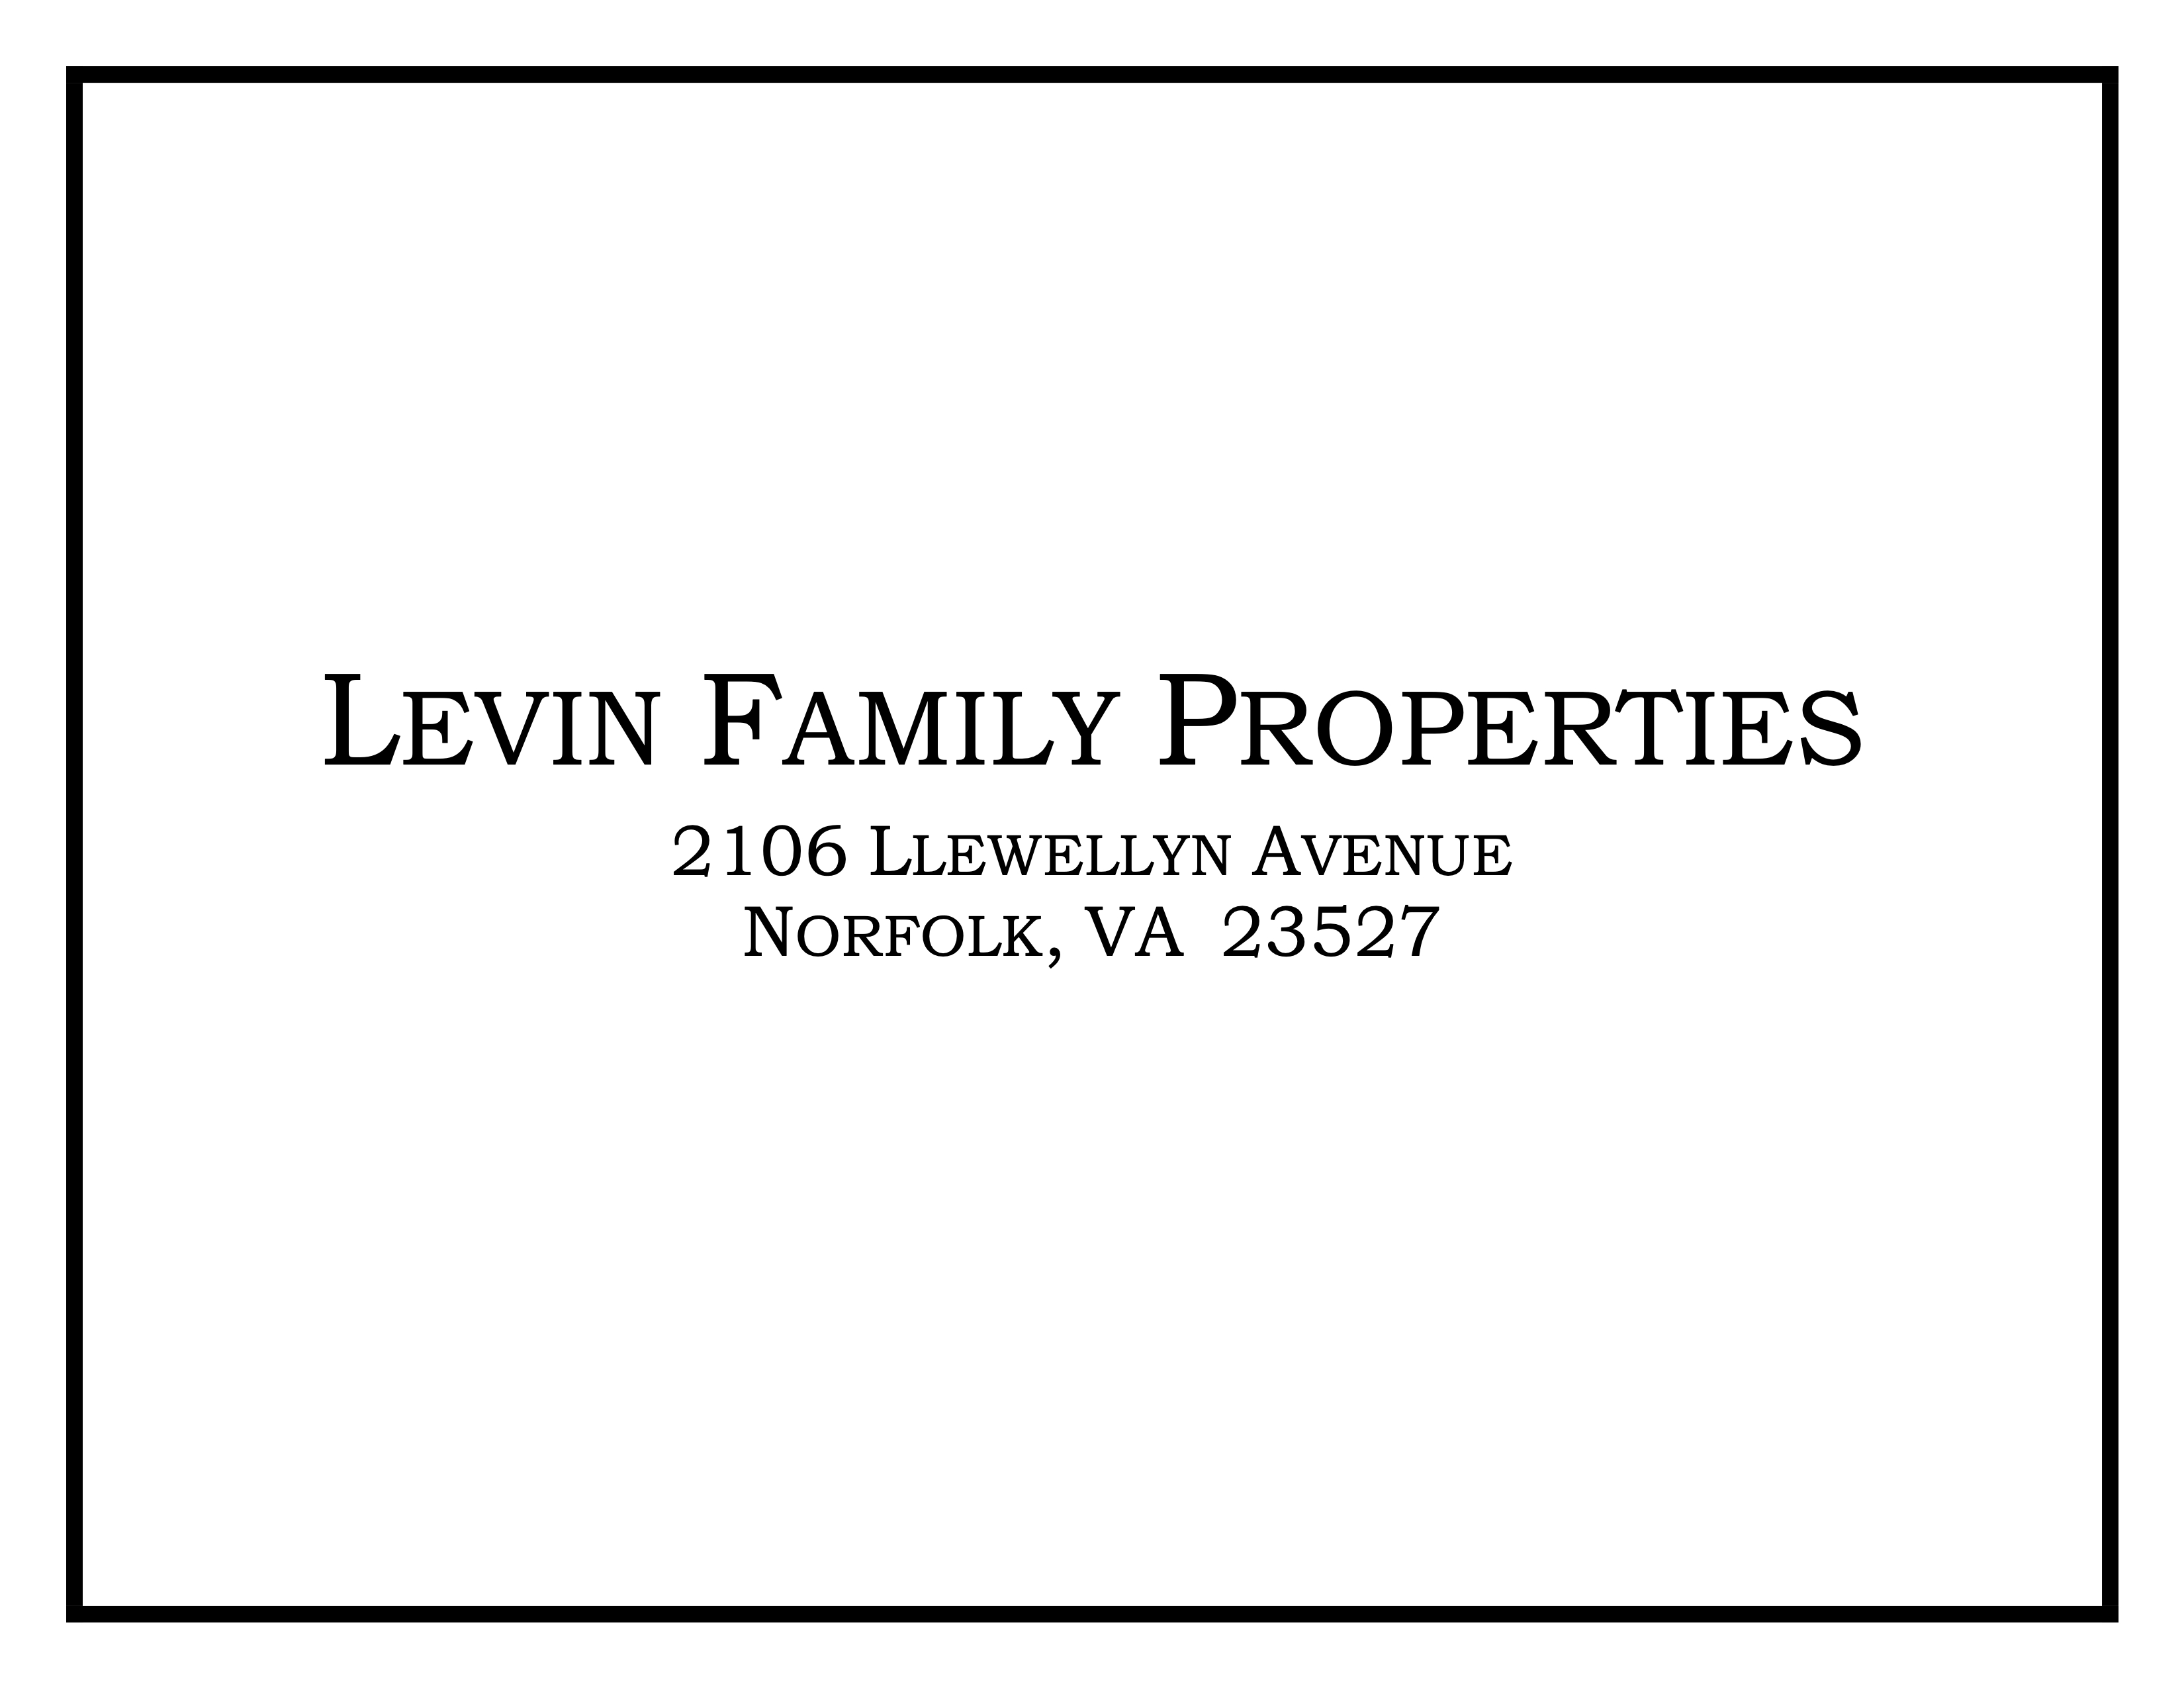 Levin Family Properties